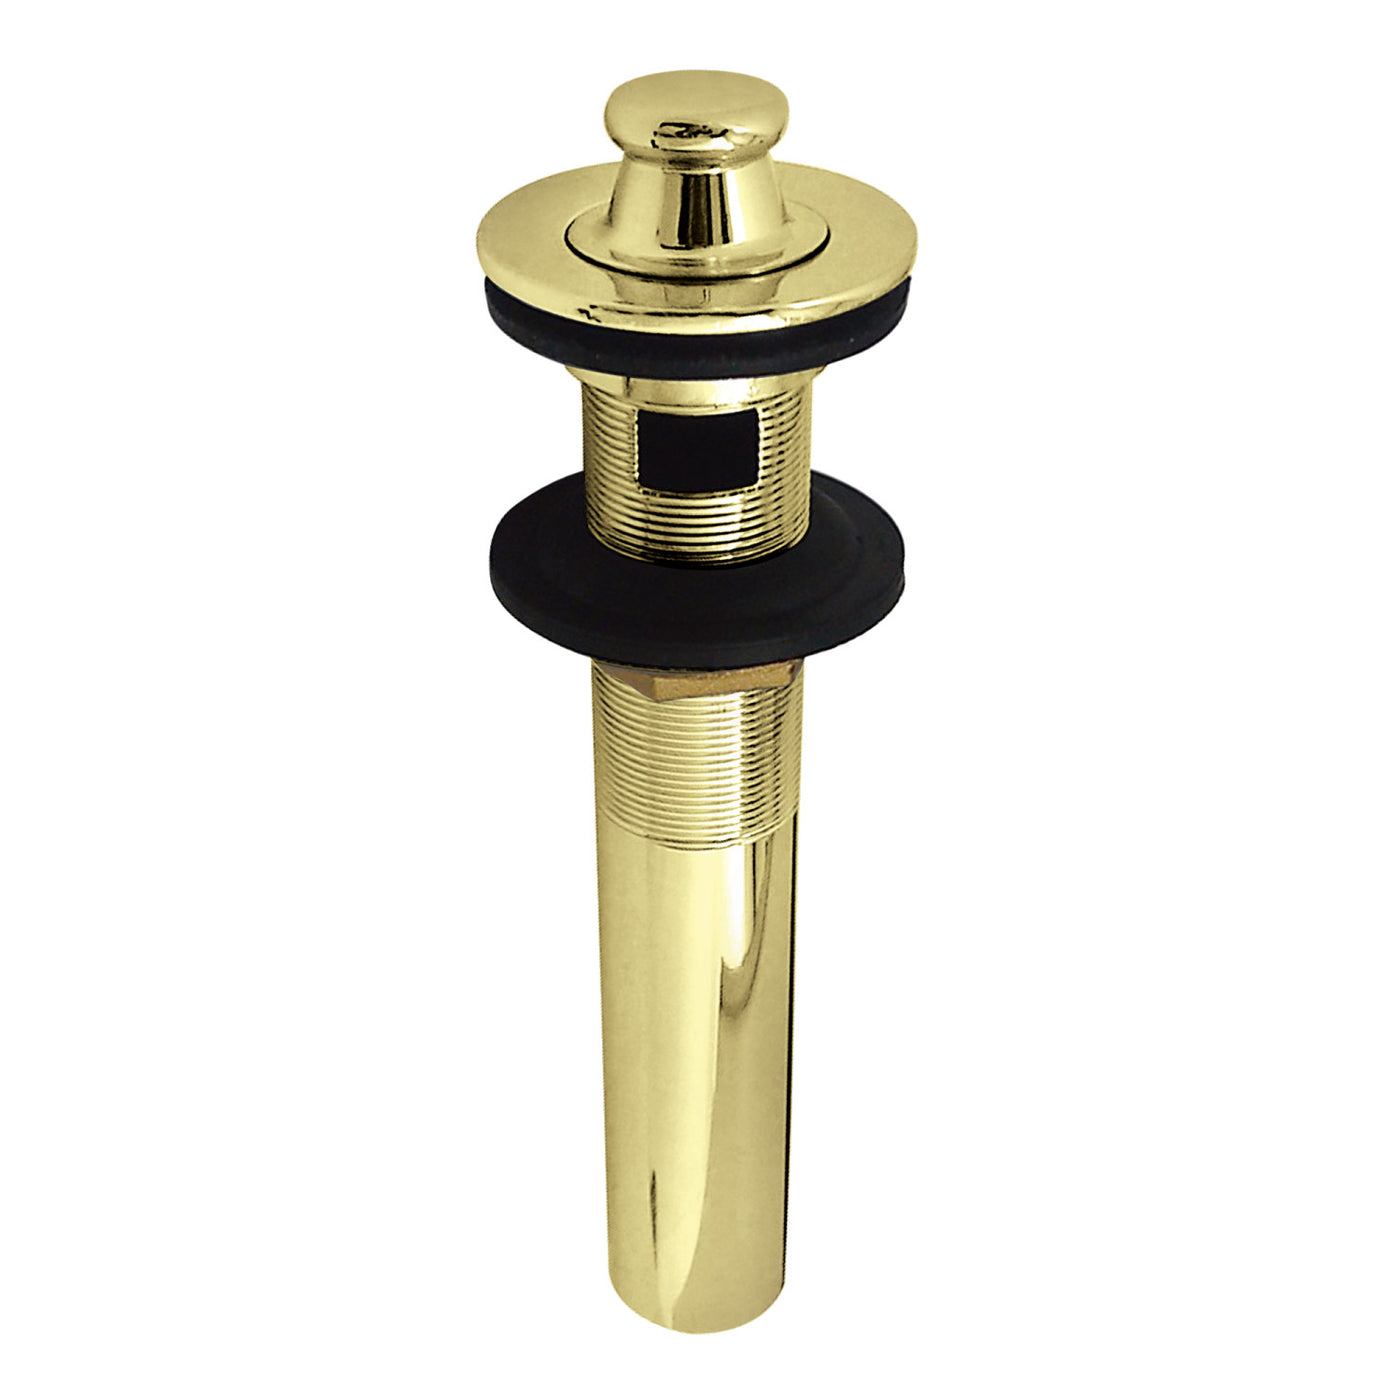 Elements of Design EB3002 Lift and Turn Sink Drain with Overflow, 17 Gauge, Polished Brass